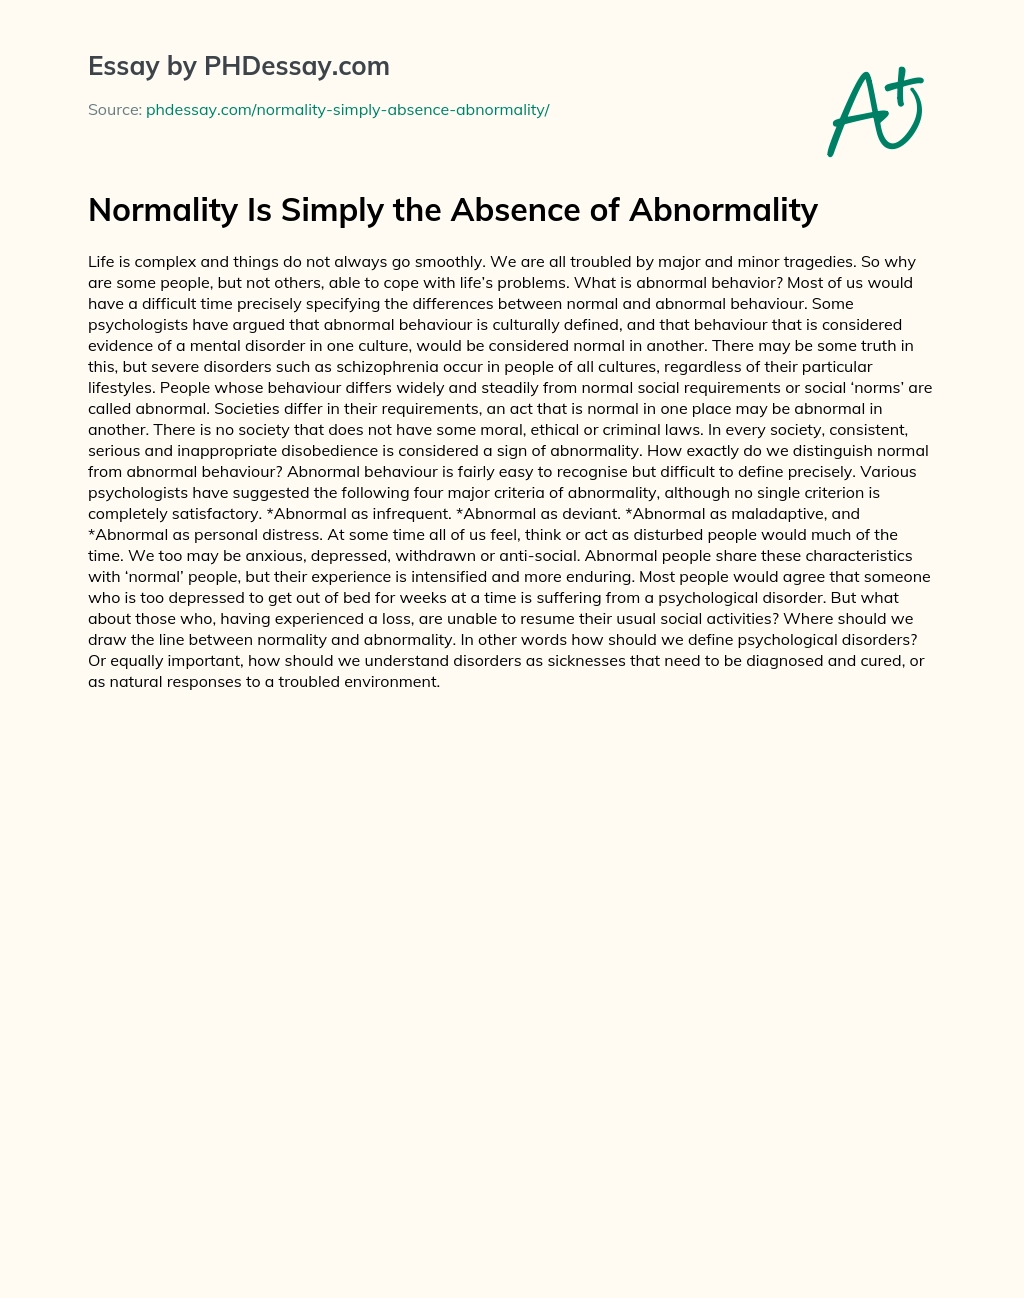 Normality Is Simply the Absence of Abnormality essay